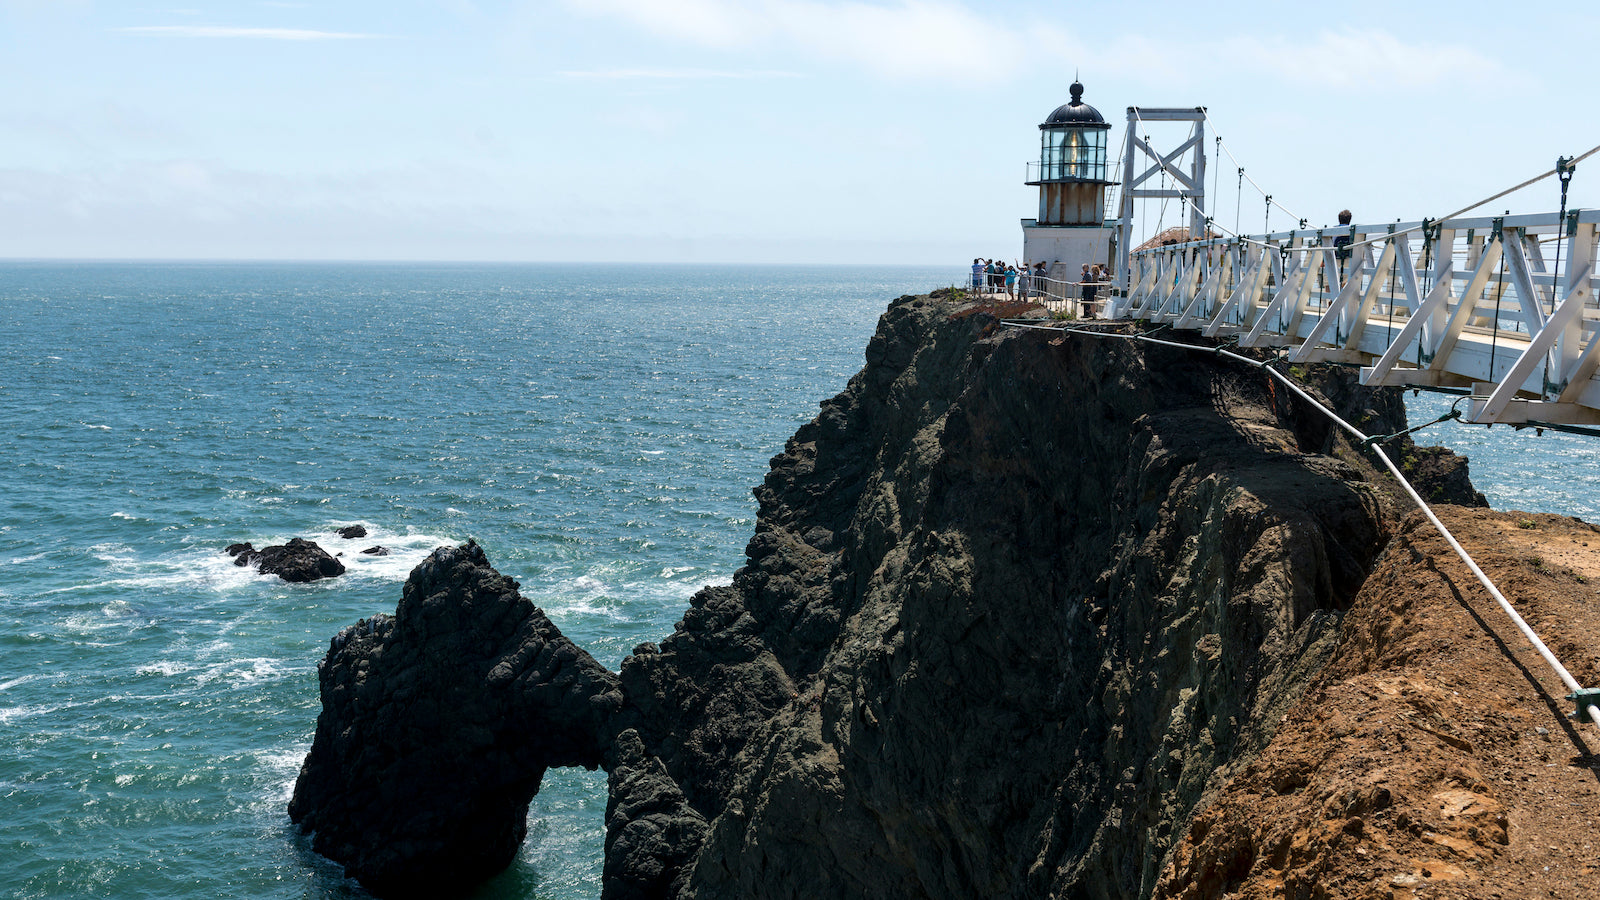 A dramatic view of Point Bonita lighthouse in the Marin Headlands. Rocky cliffs descend into turquoise waters, while the soaring pedestrian bridge rises in the foreground.